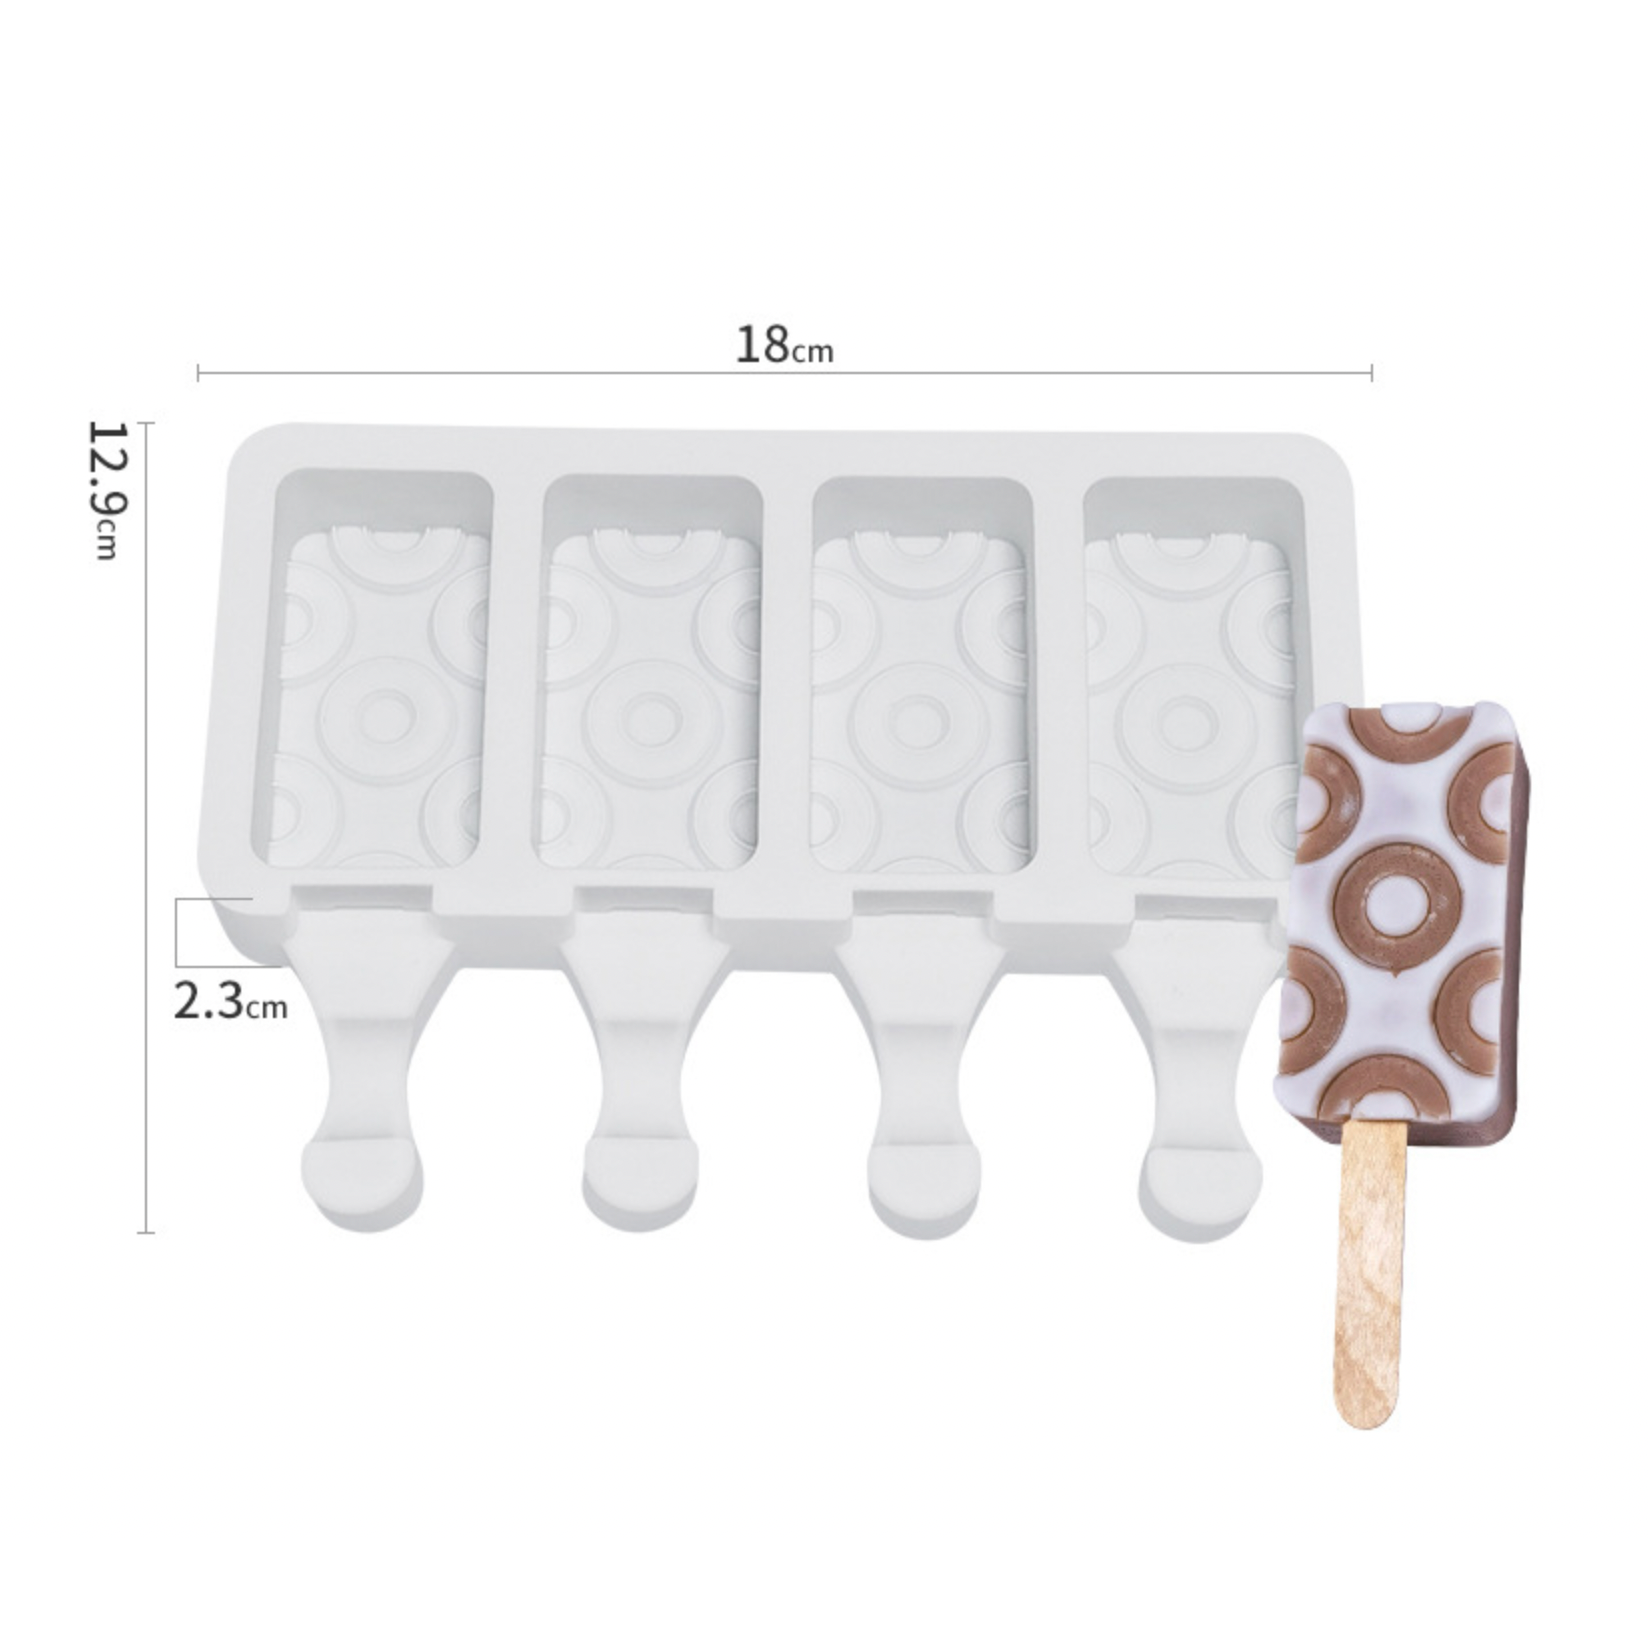 Silicone Cakesicle Mould 4 Slots #1164 – The Kek Shop